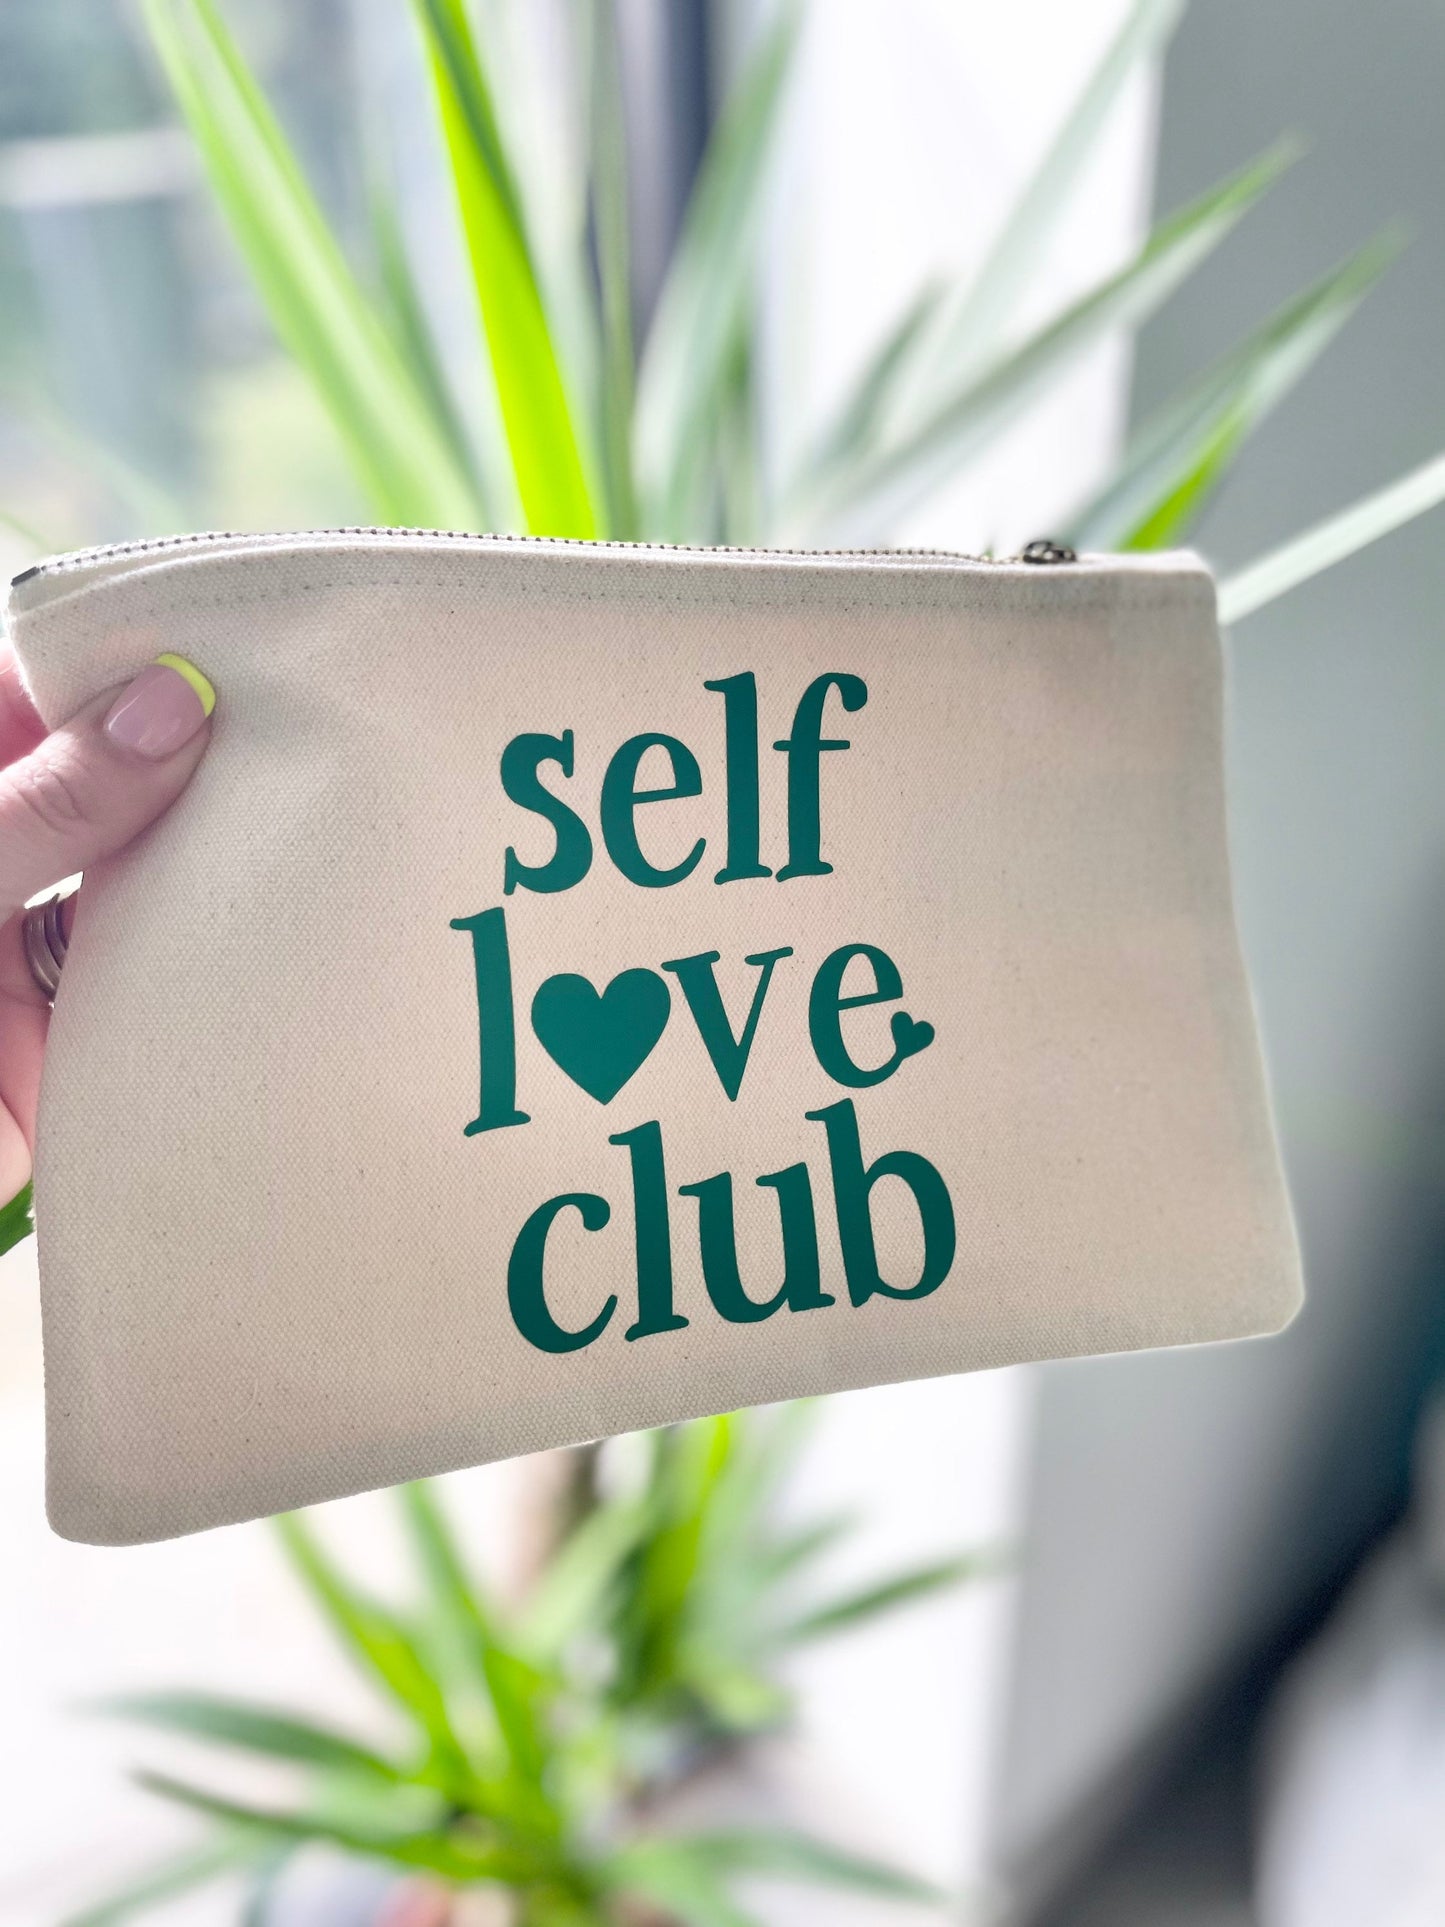 Self love club pouch, positivity gift, make up case, self care kit, friend birthday gift, work wife bestie present